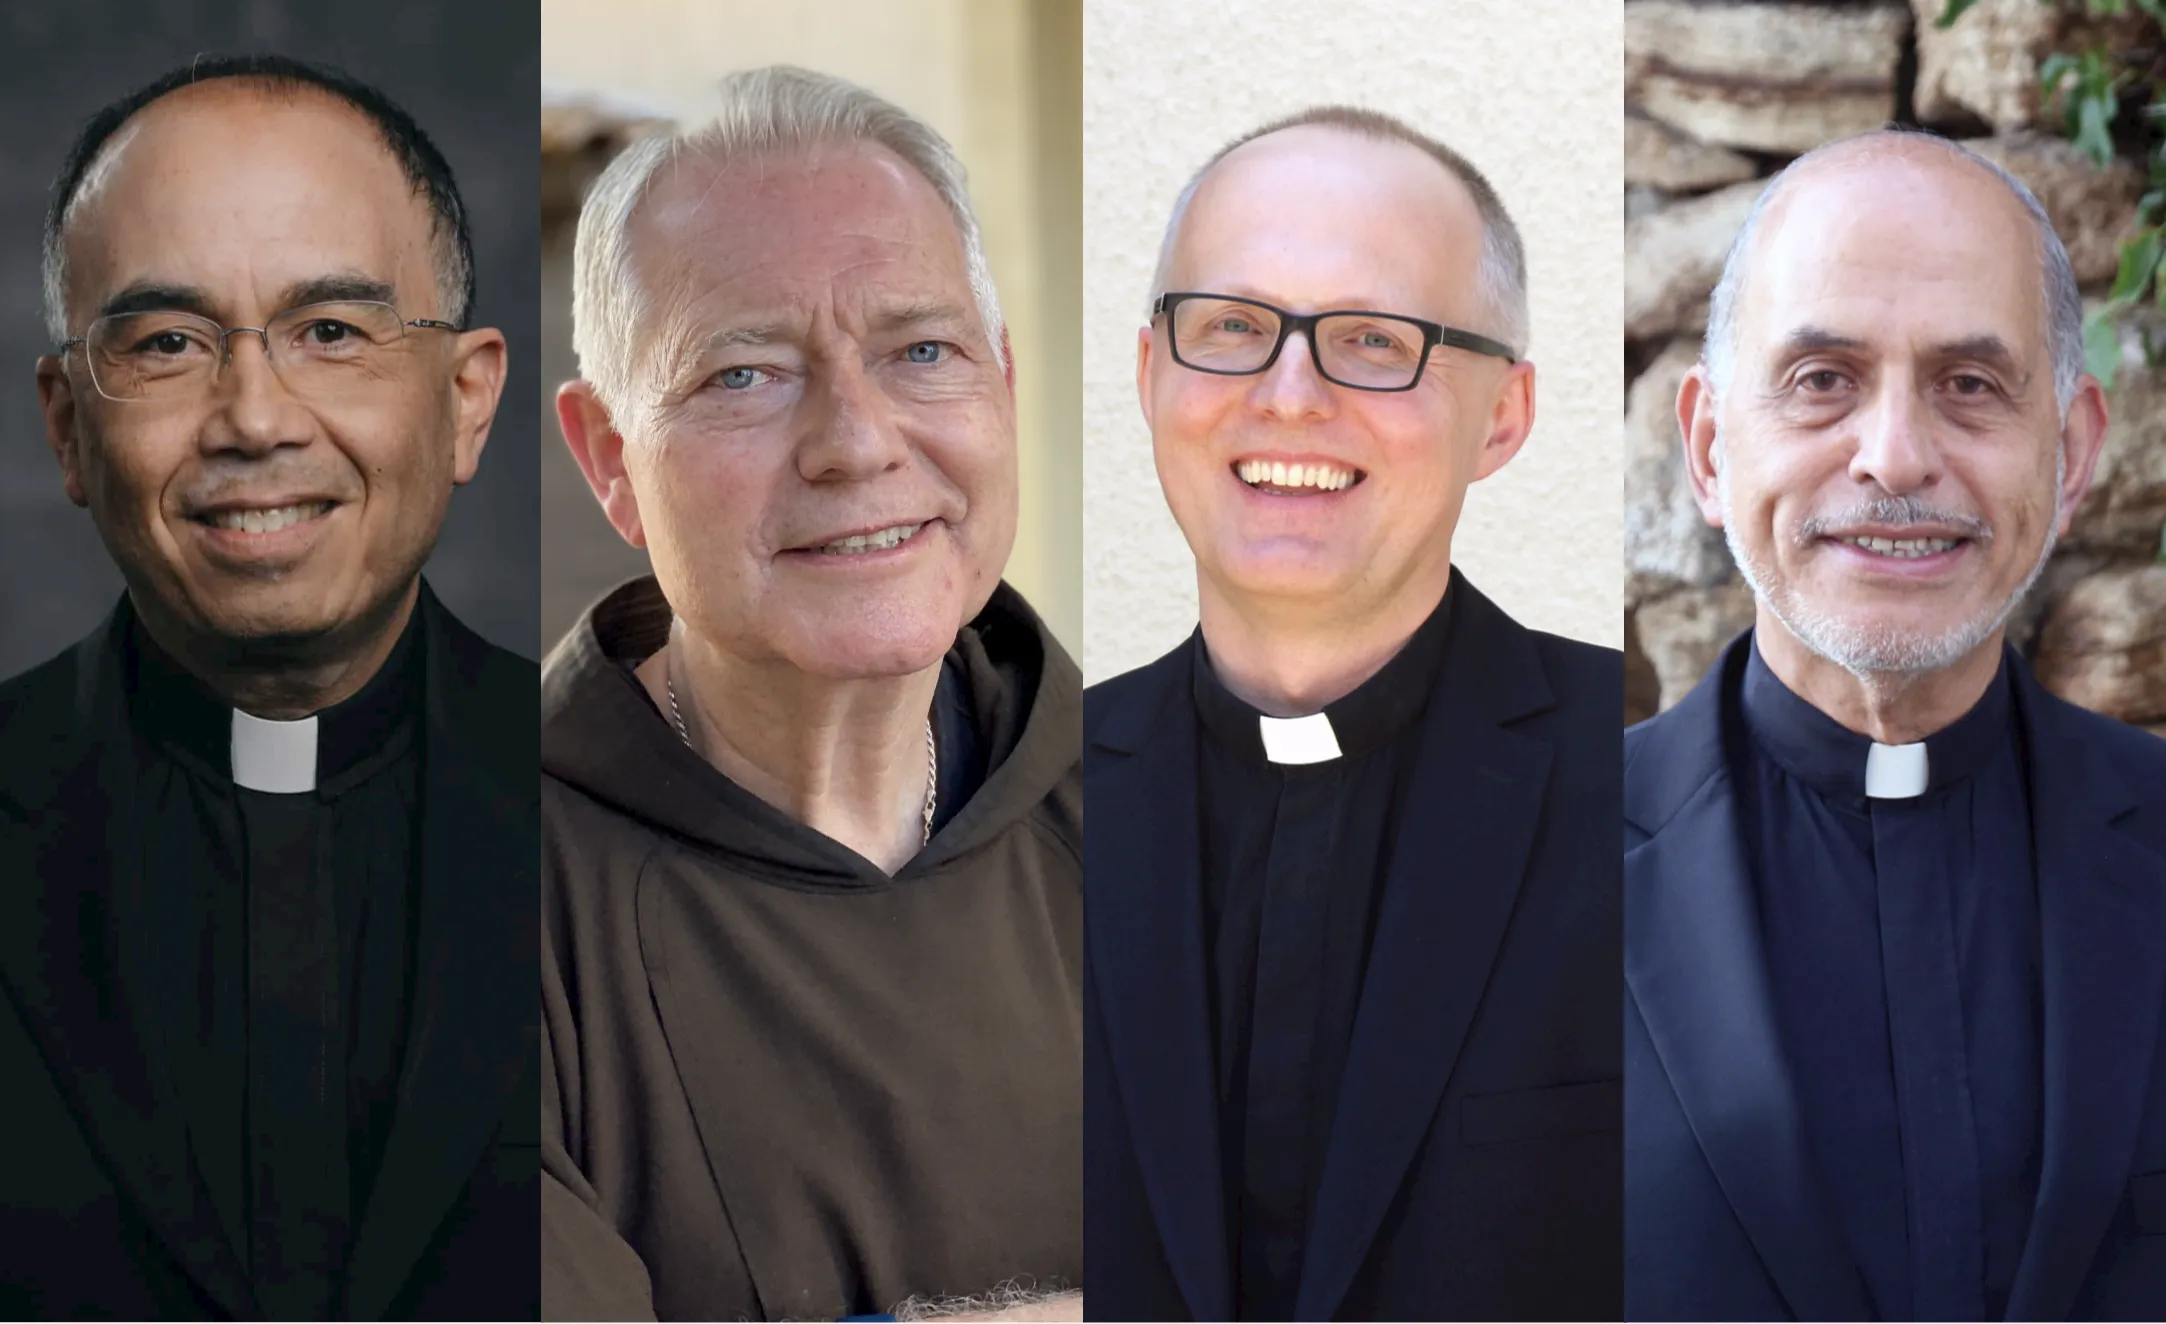 Father Brian Nunes (left), Father Matthew Elshoff, Father Slawomir Szkredka, and Monsignor Albert Bahhuth (right) have been named auxiliary bishops of the Archdiocese of Los Angeles.?w=200&h=150